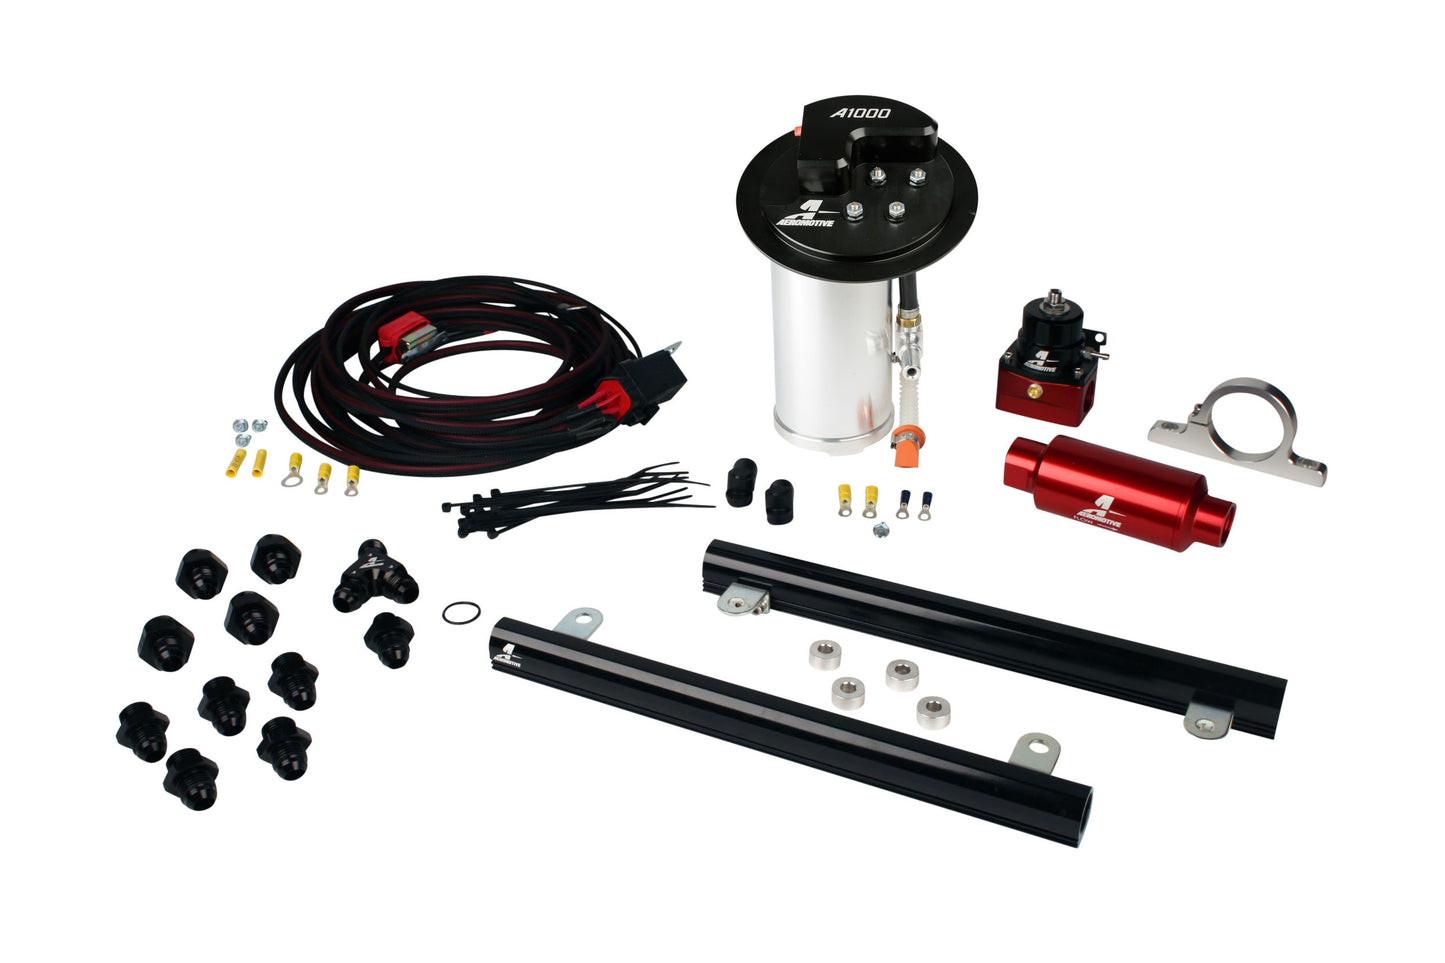 10-17 Mustang GT Stealth A1000 Racing Fuel System with 5.4L CJ Fuel Rails